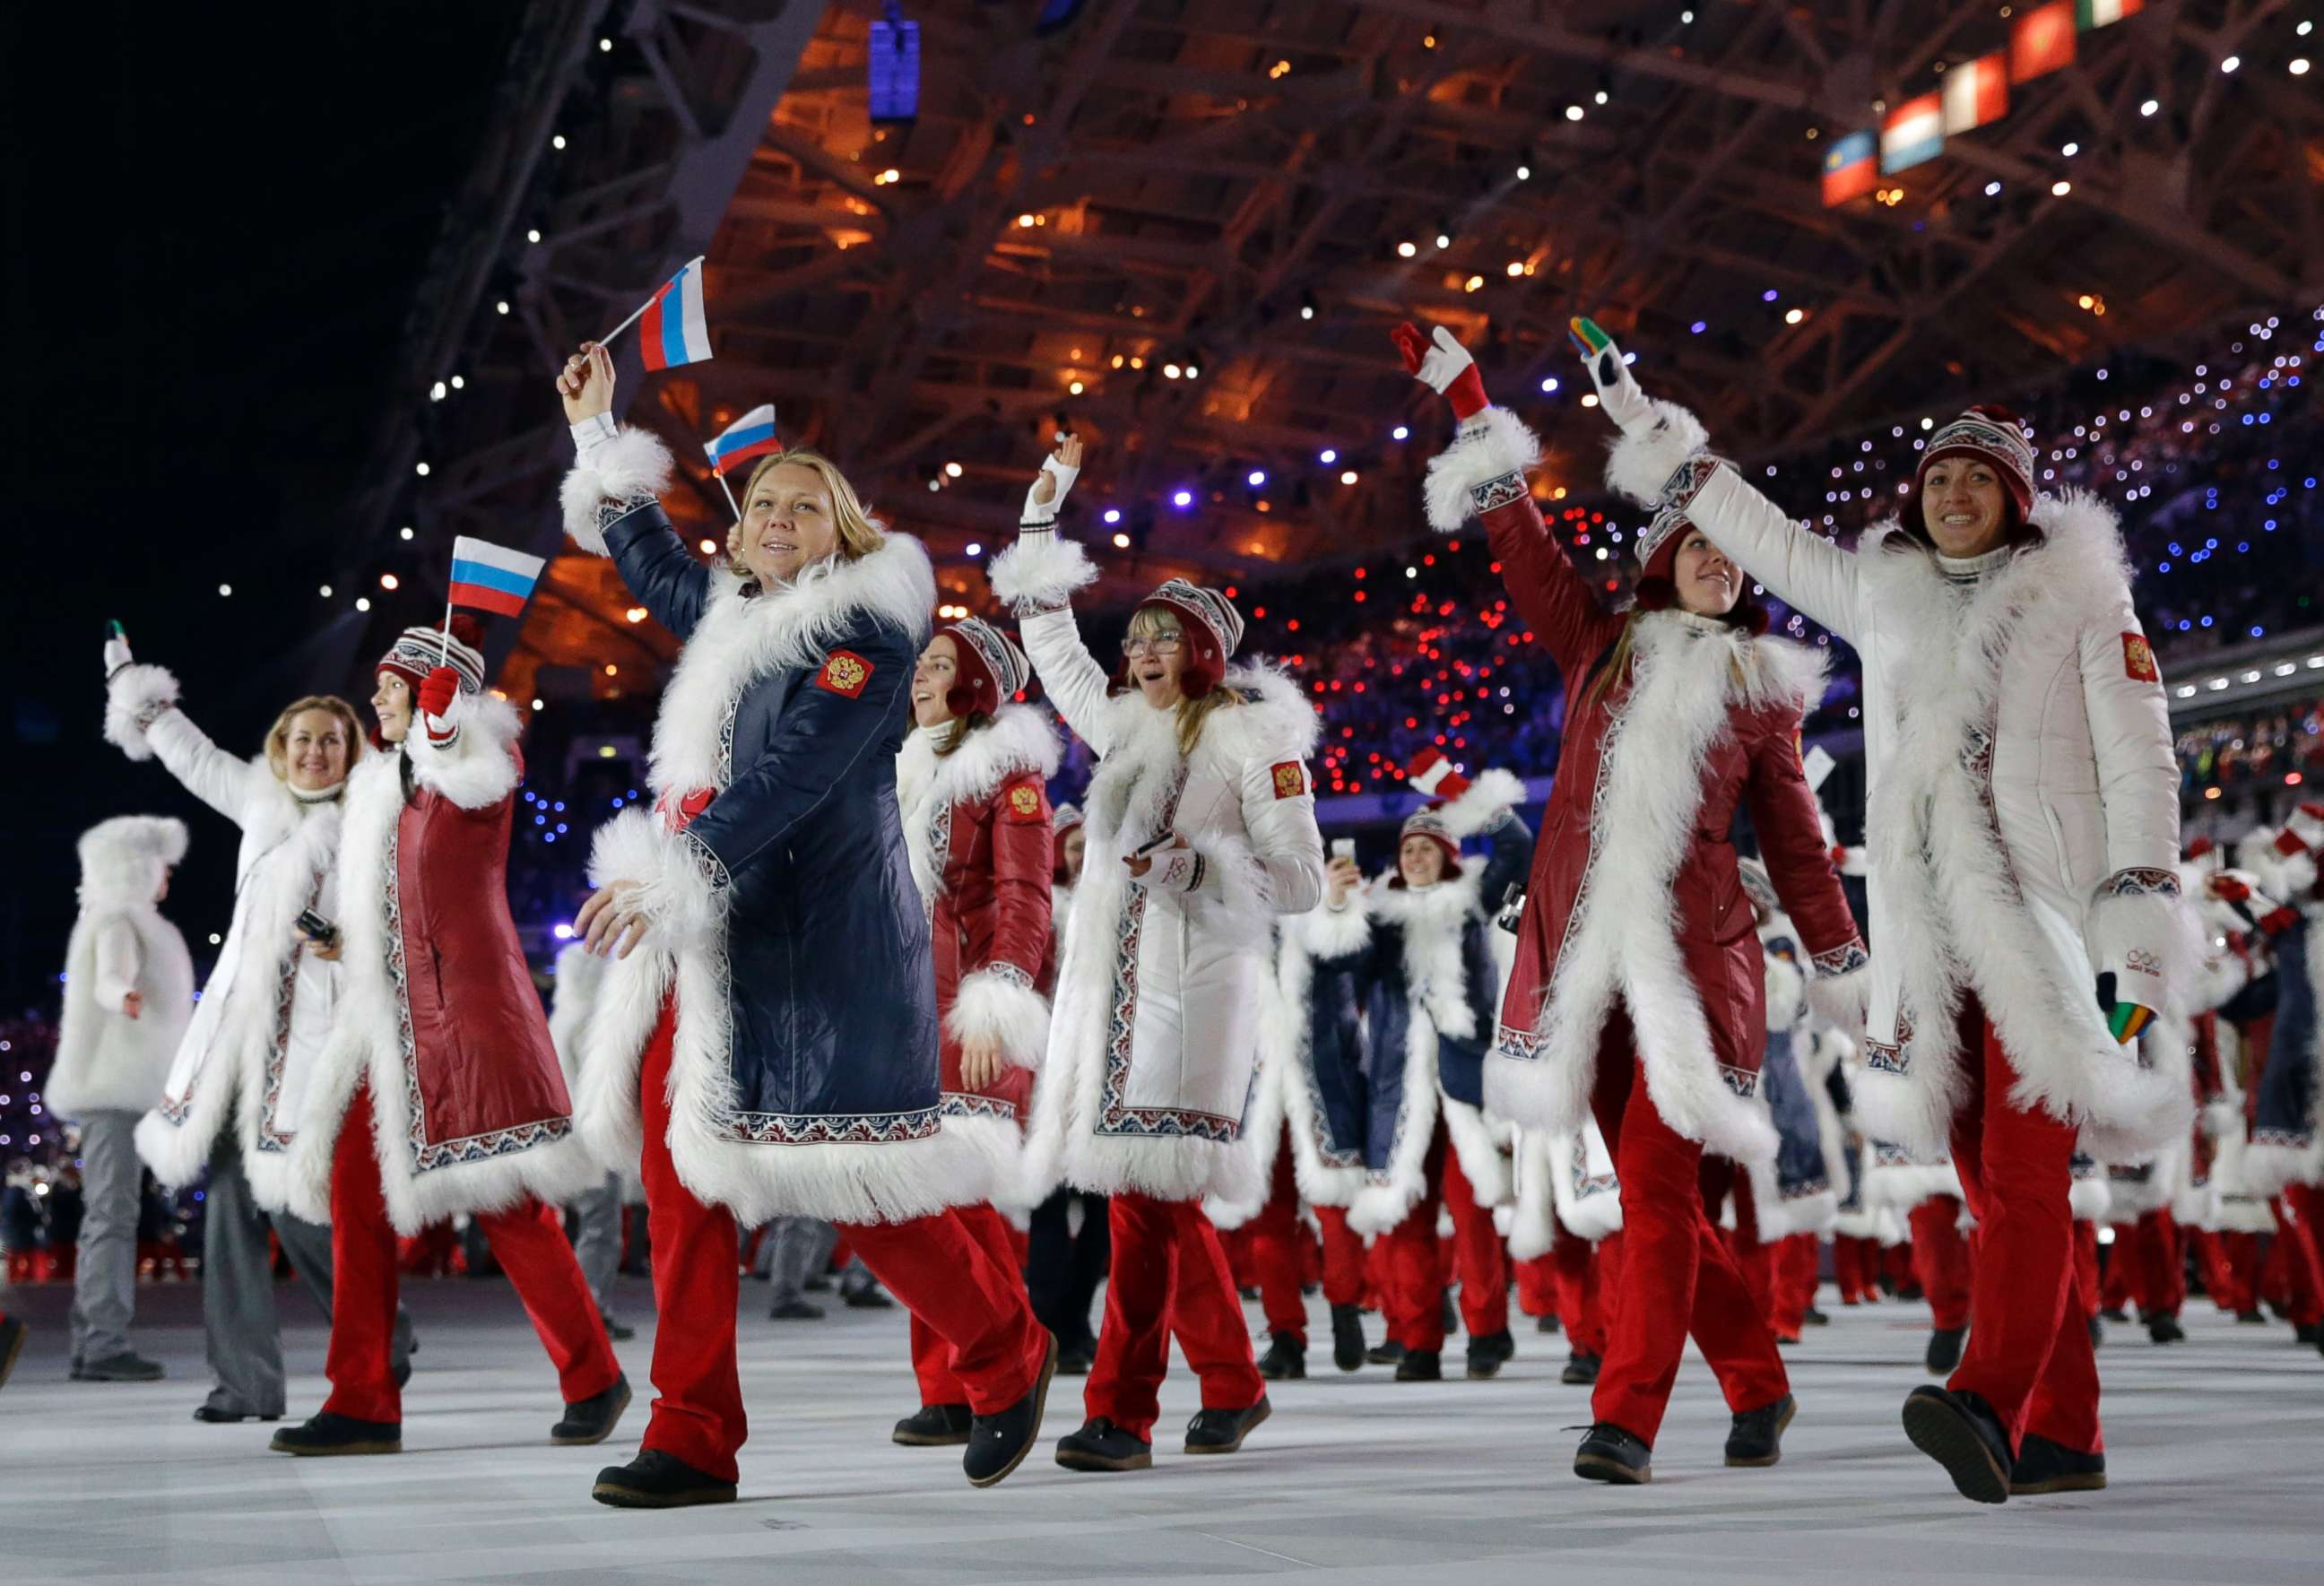 PHOTO: Members of the Russian team cheer as they enter the stadium during the opening ceremony of the 2014 Winter Olympics in Sochi, Russia, Feb. 7, 2014.